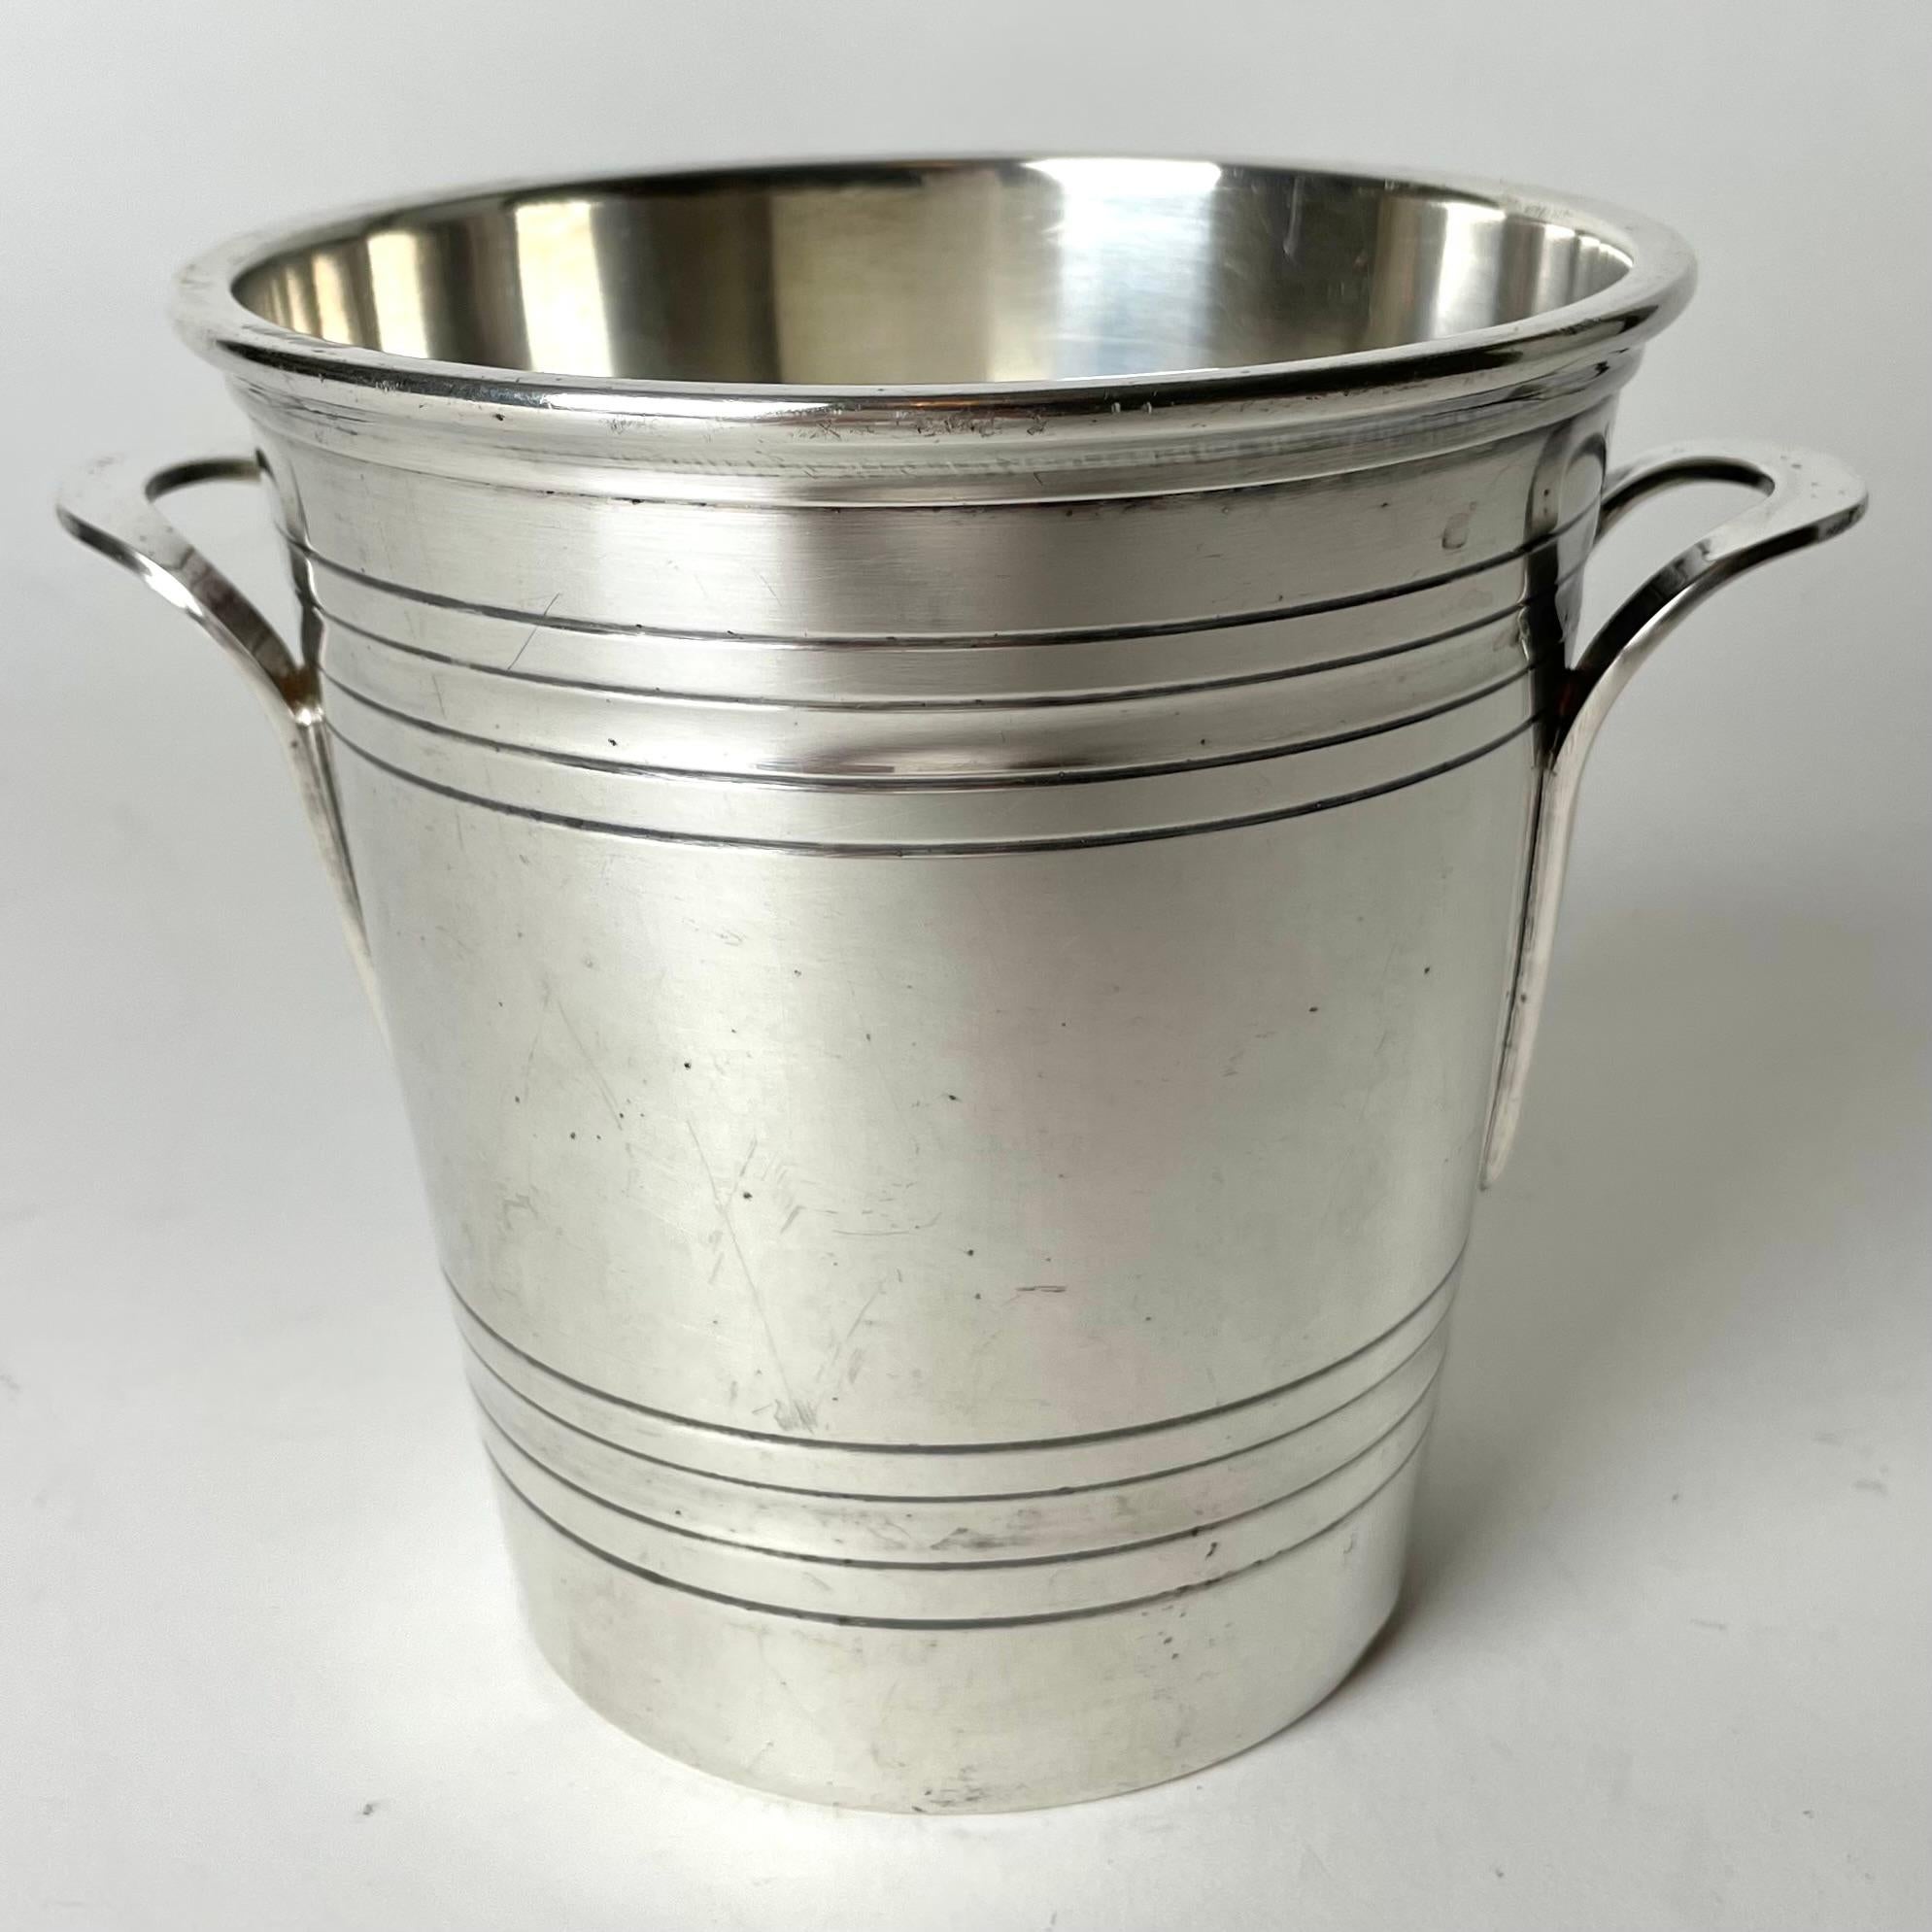 
A Beautiful silver plated Ice Bucket in Art Deco from the 1920s-1930s by Saint Médard

Wear consistent with age and use.